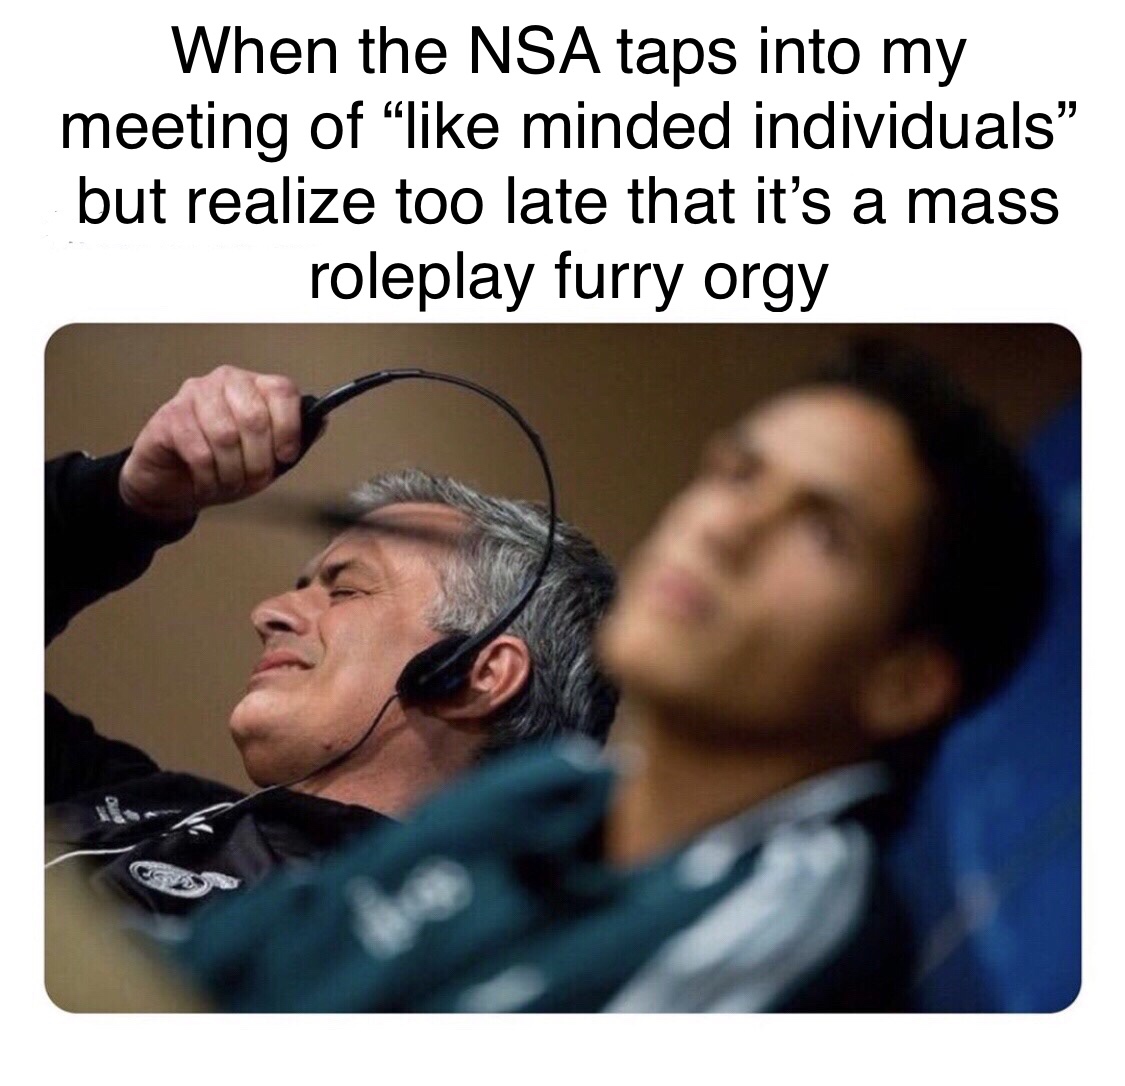 fbi agent meme - When the Nsa taps into my meeting of minded individuals but realize too late that it's a mass roleplay furry orgy